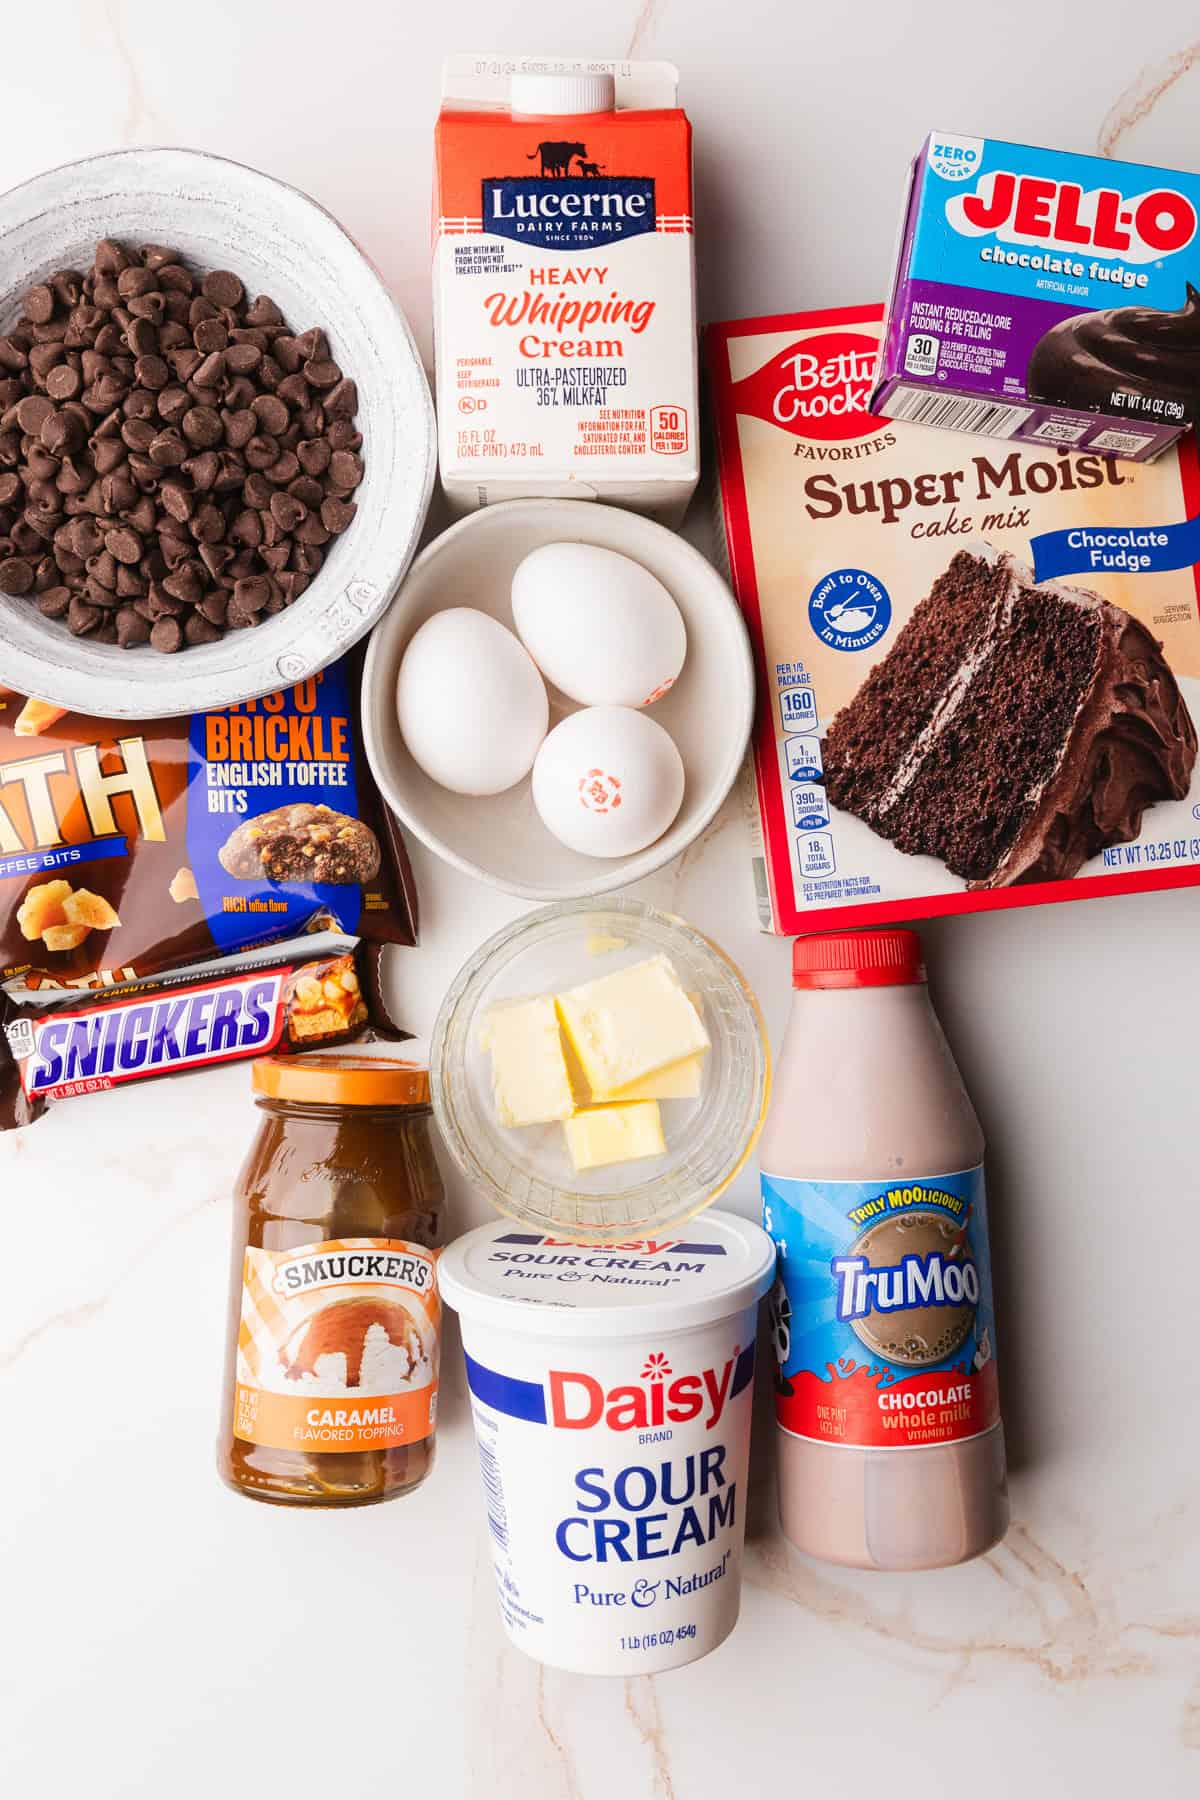 Ingredients to make the chocolate dream cake.